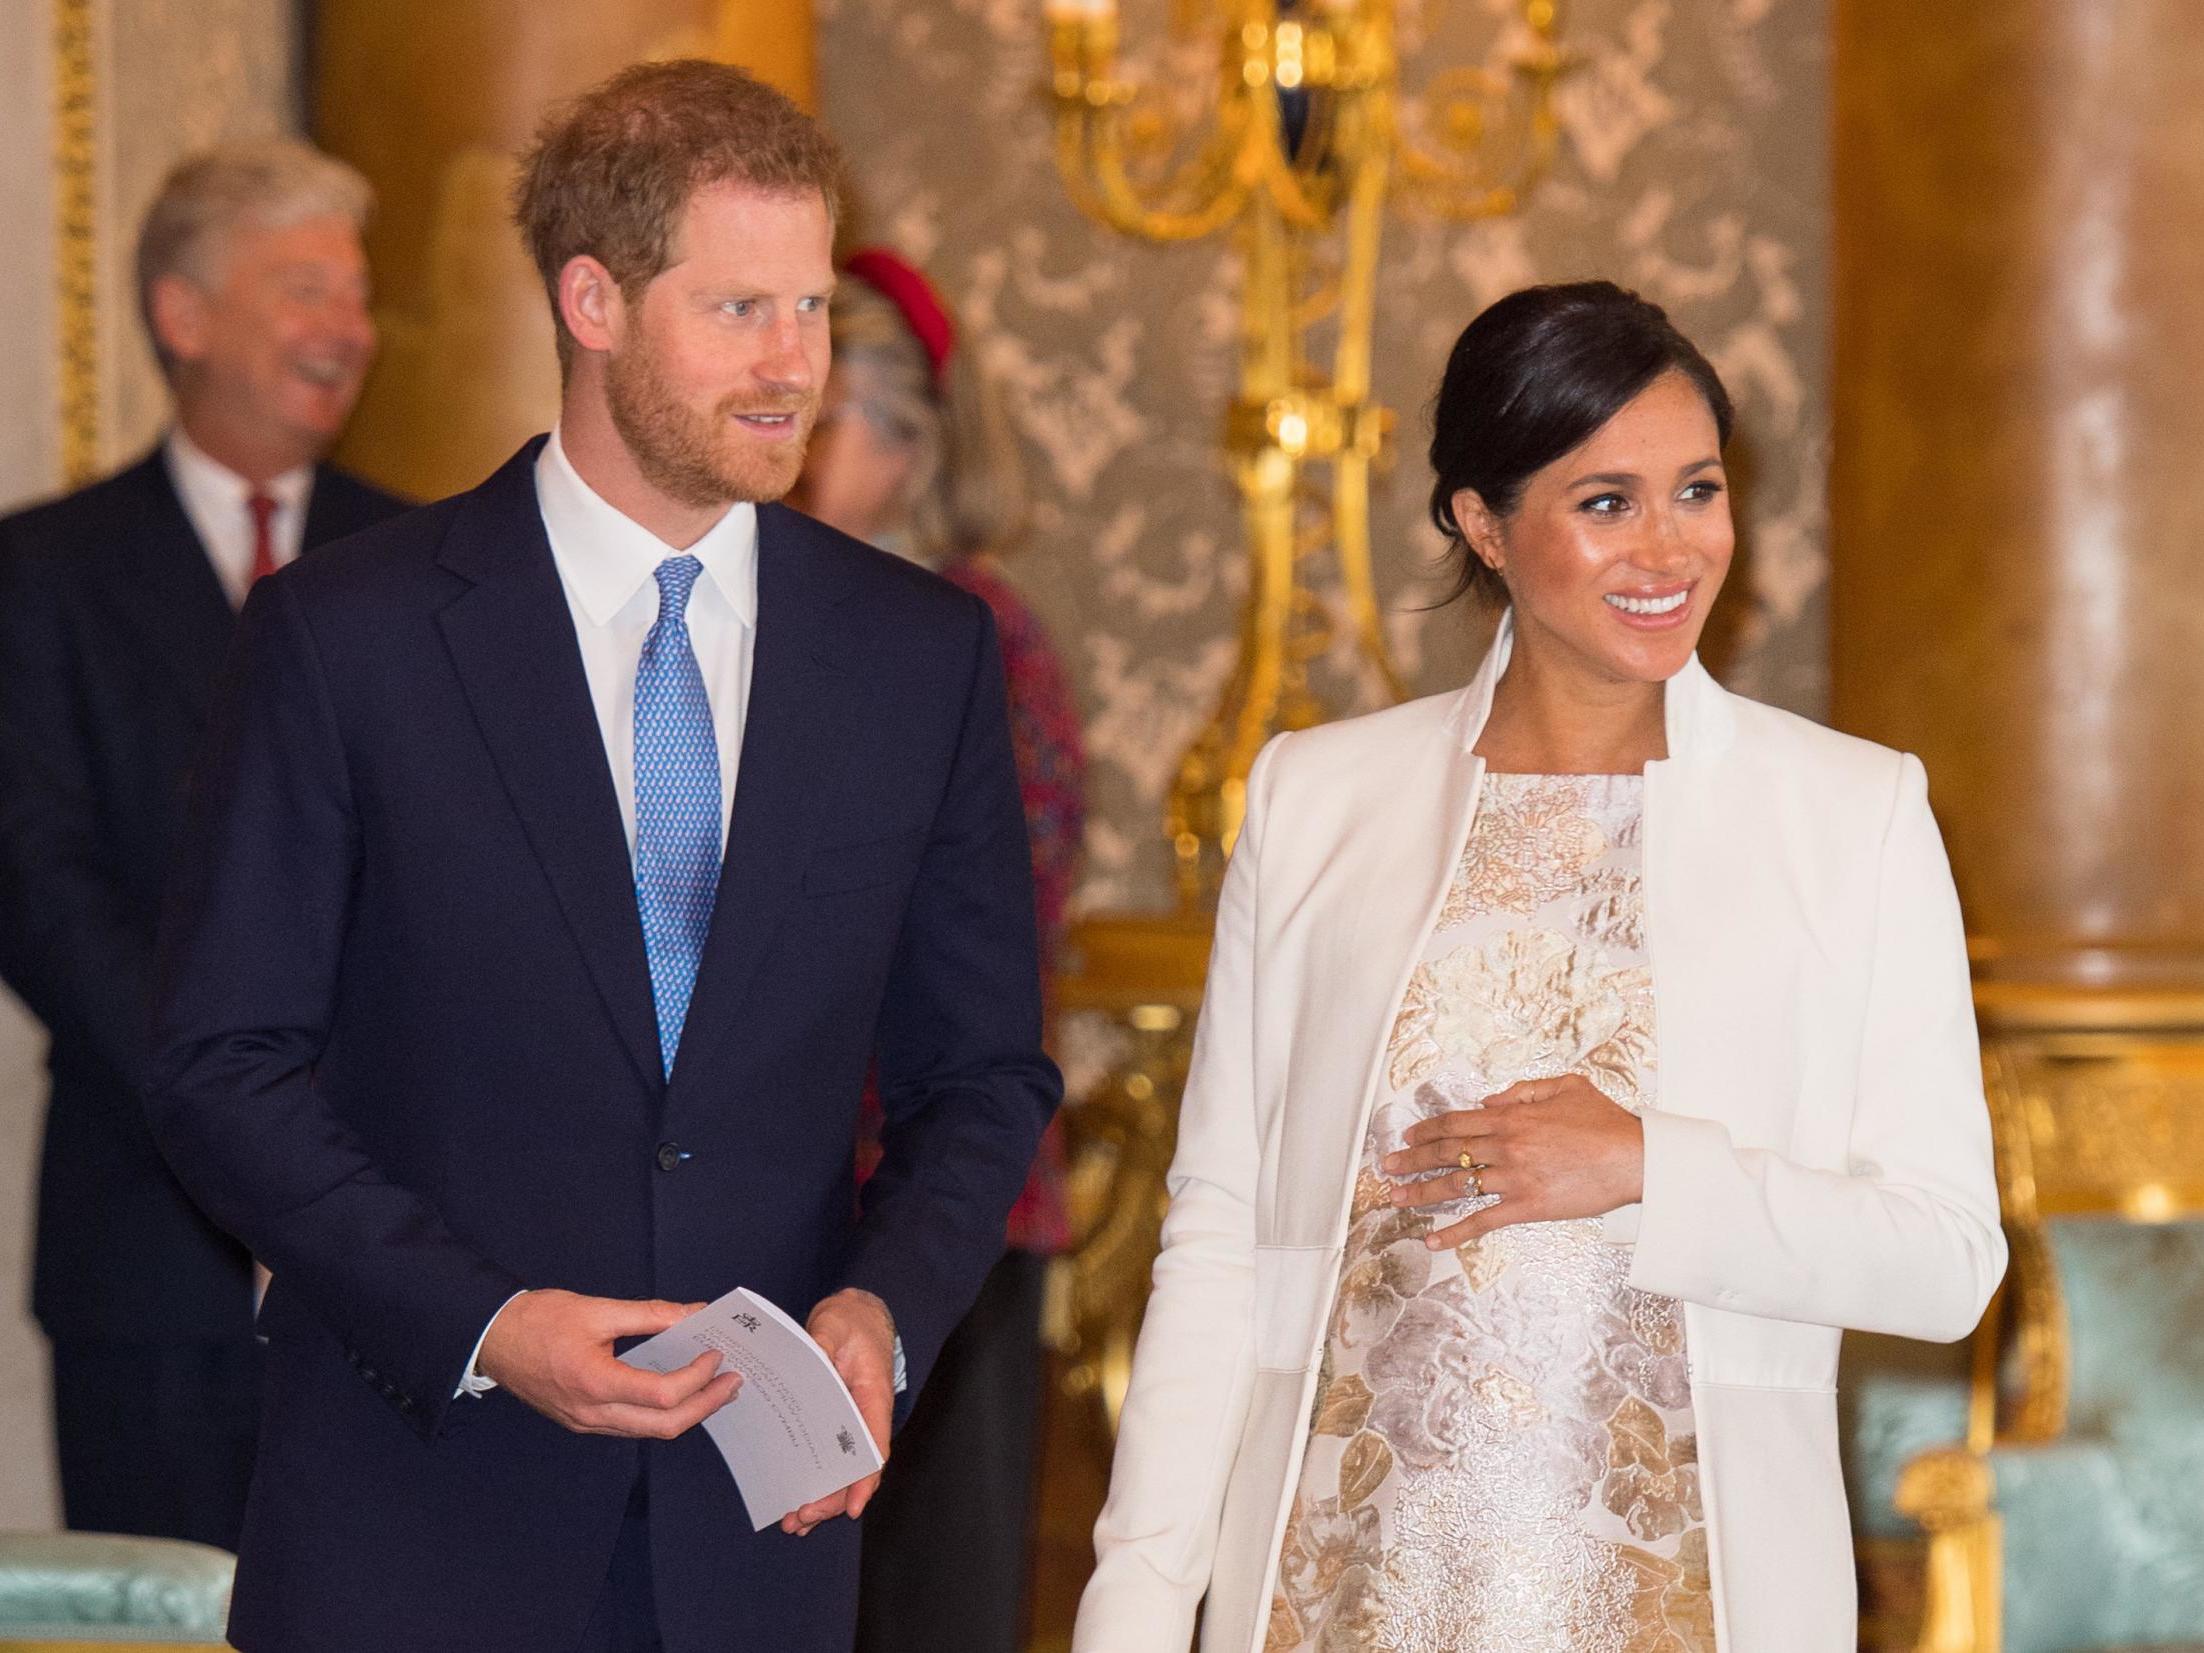 Prince Harry, Duke of Sussex, and Meghan Markle, Duchess of Sussex, at Buckingham Palace, 5 March 2019.